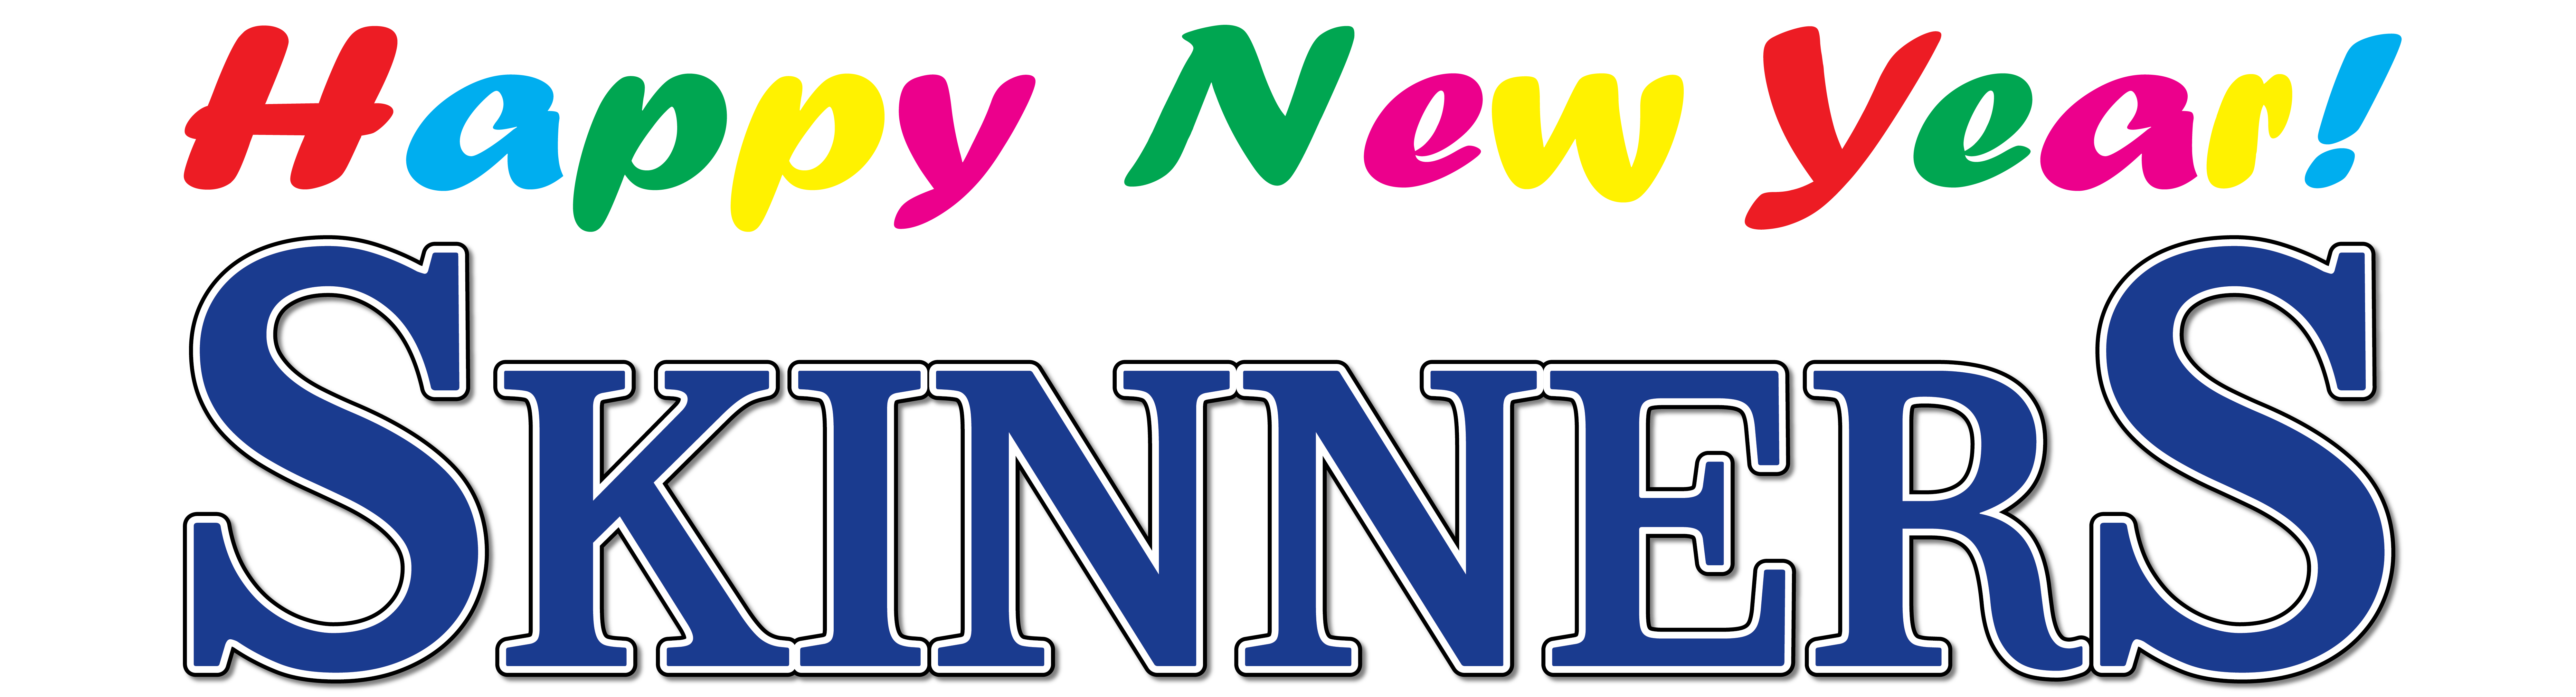 Happy New Year Skinners Banner PNG